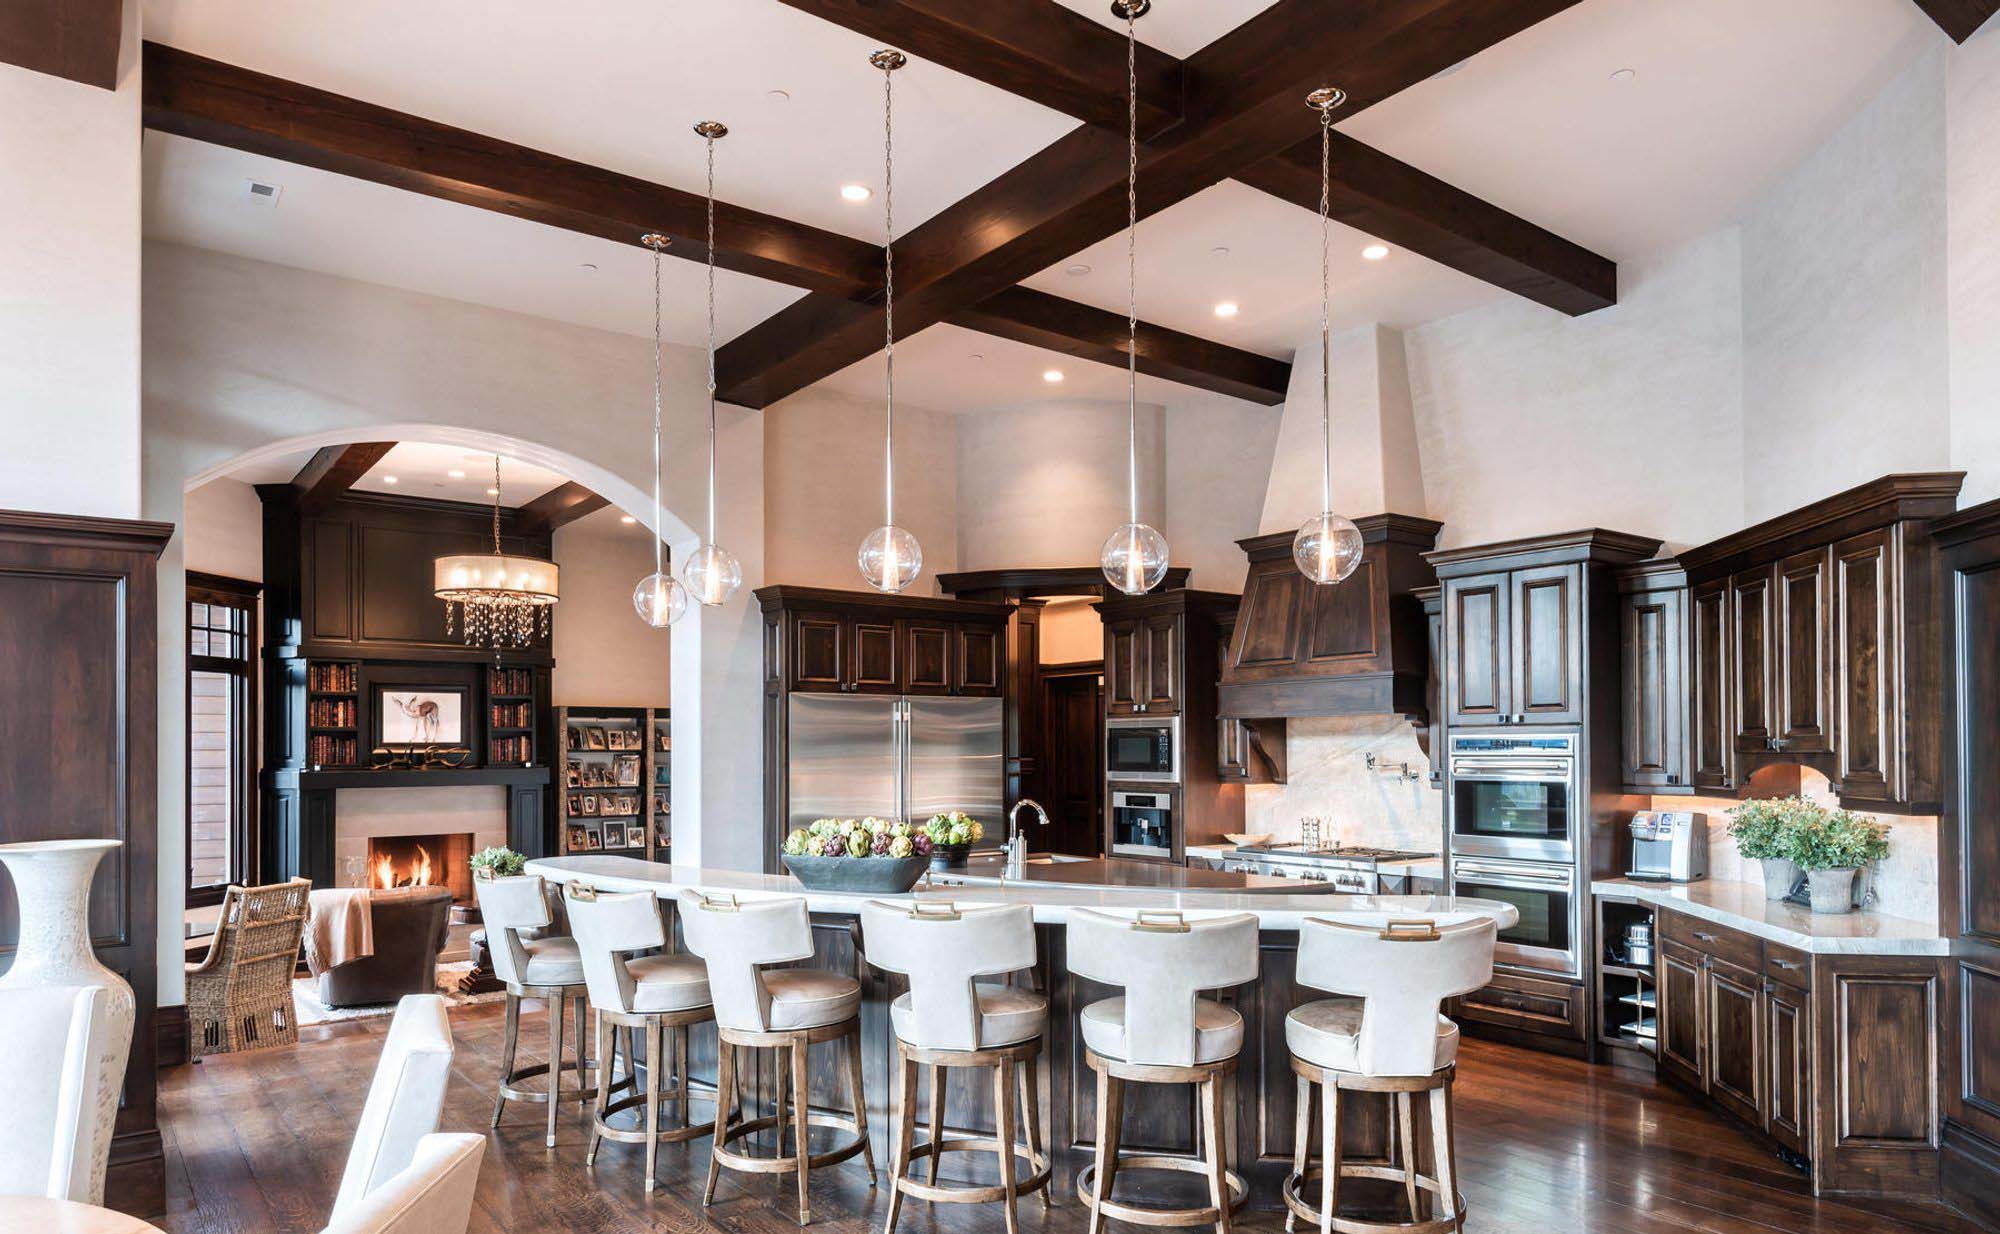 Luxury high end kitchen with dark wood floors, cabinets and coffered ceiling with exposed real wood beams.